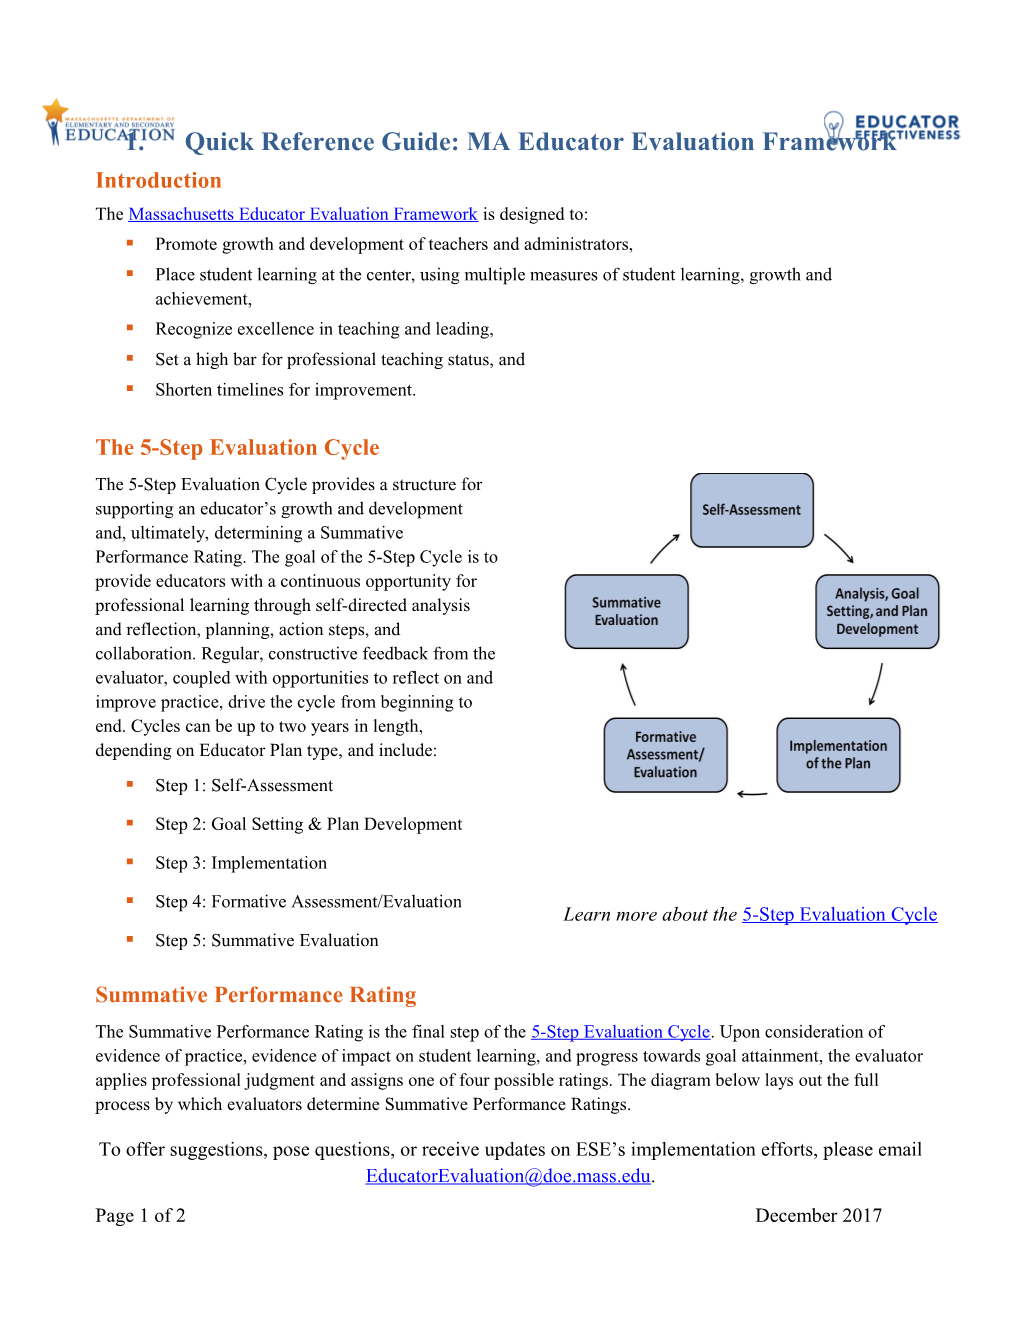 Quick Reference Guide: MA Educator Evaluation Framework